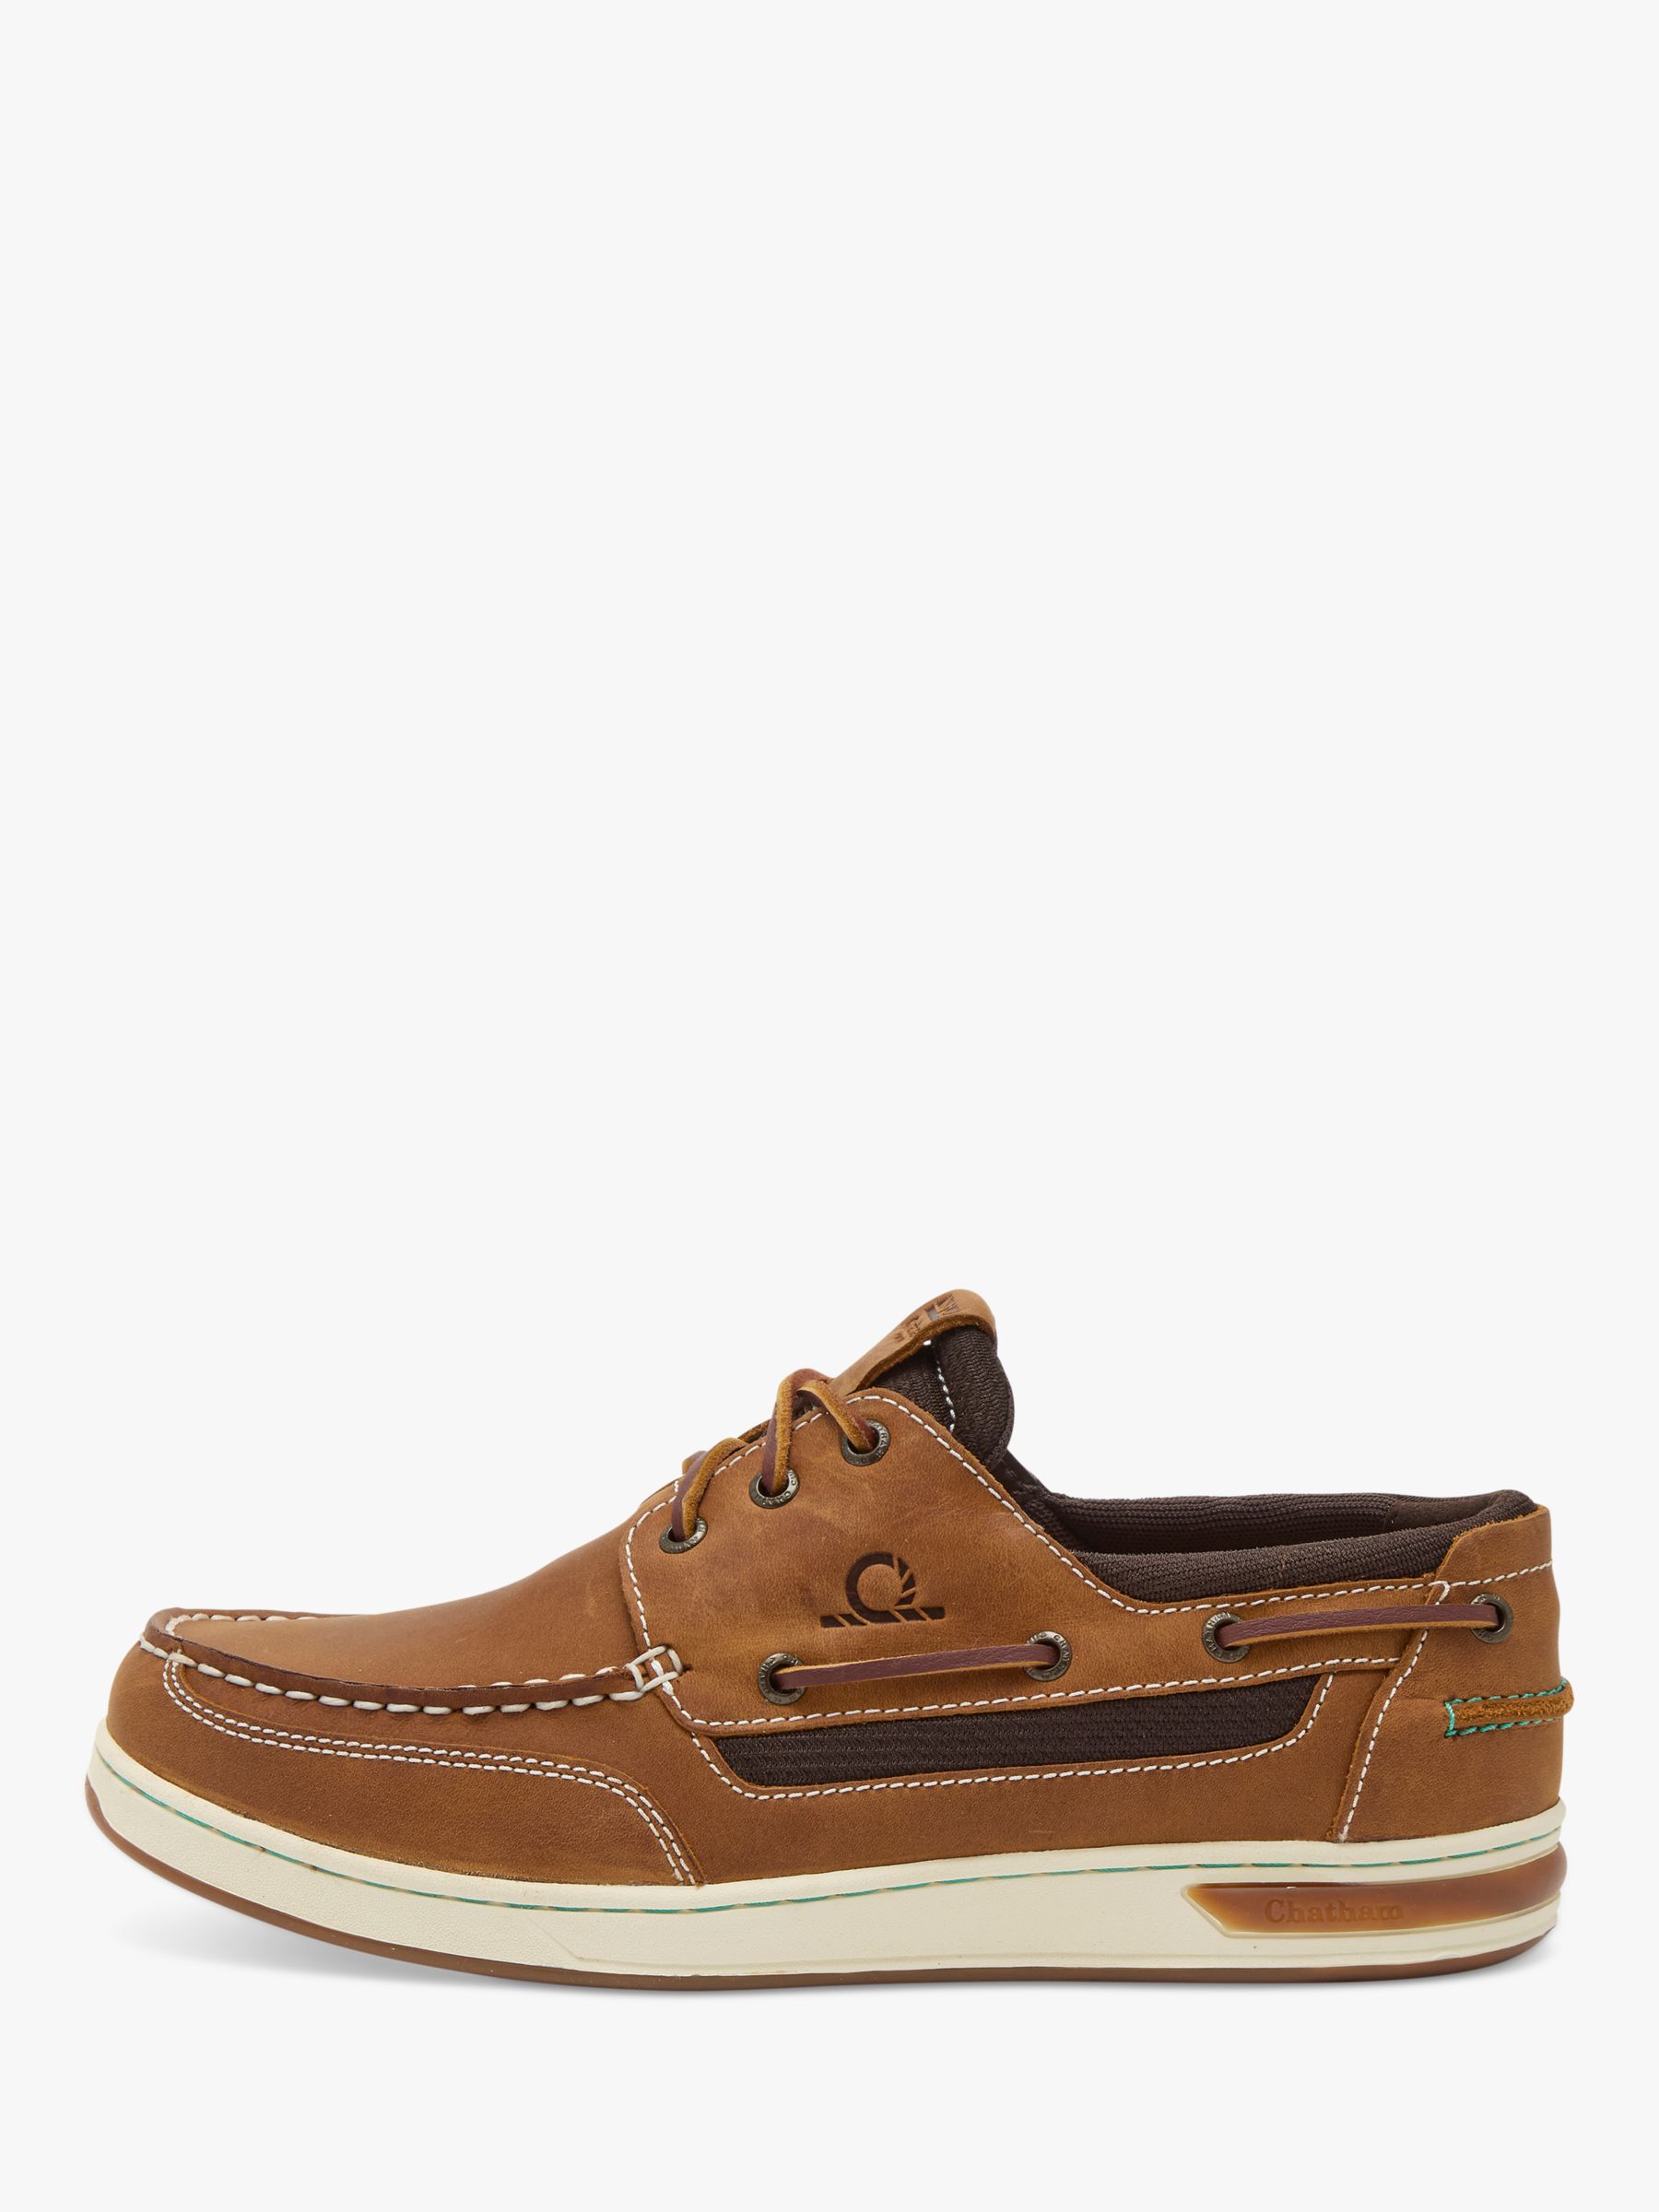 Buy Chatham Buton G2 Leather Deck Shoes, Walnut Online at johnlewis.com